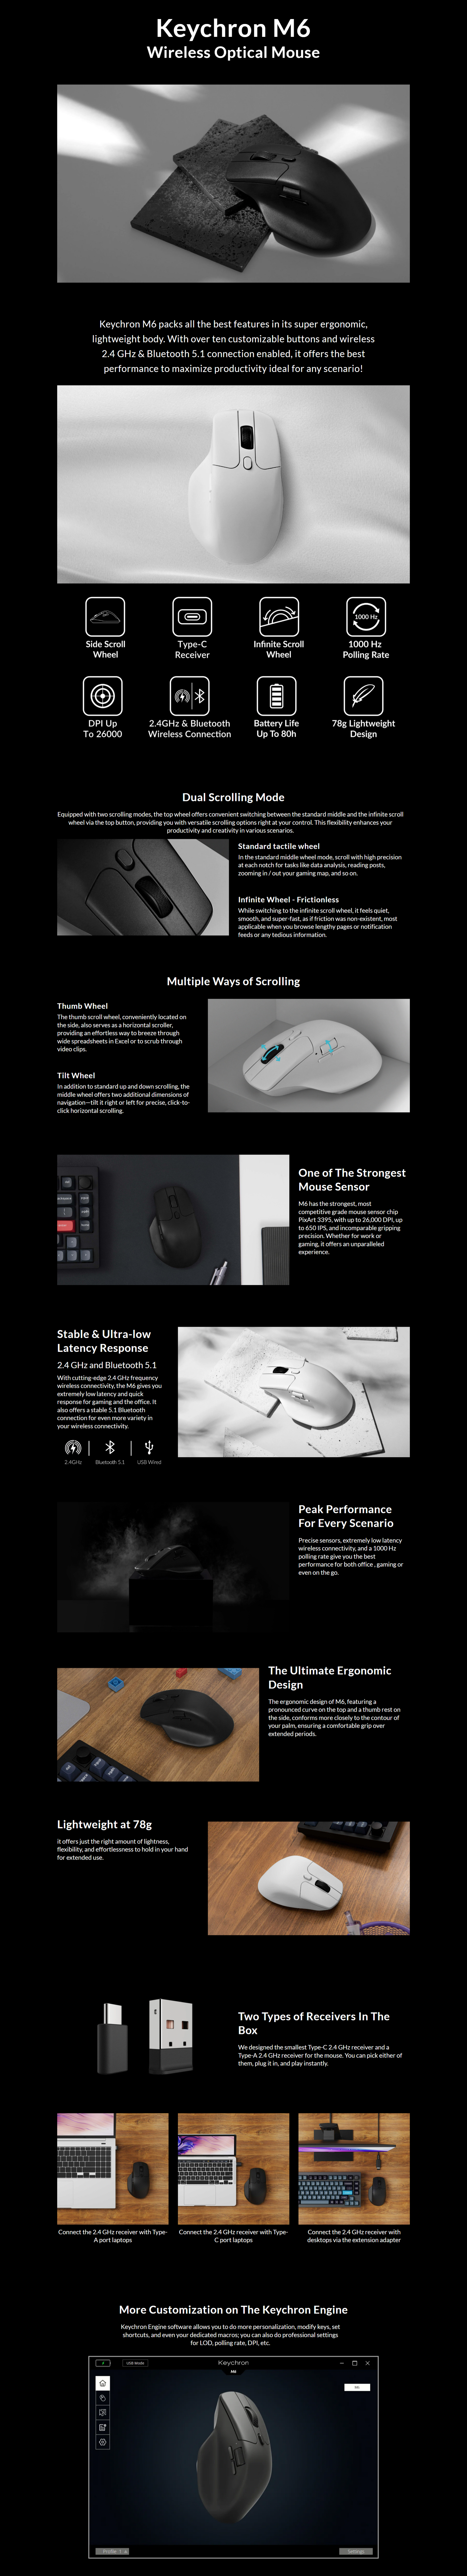 A large marketing image providing additional information about the product Keychron M6 Wireless Mouse - Black - Additional alt info not provided